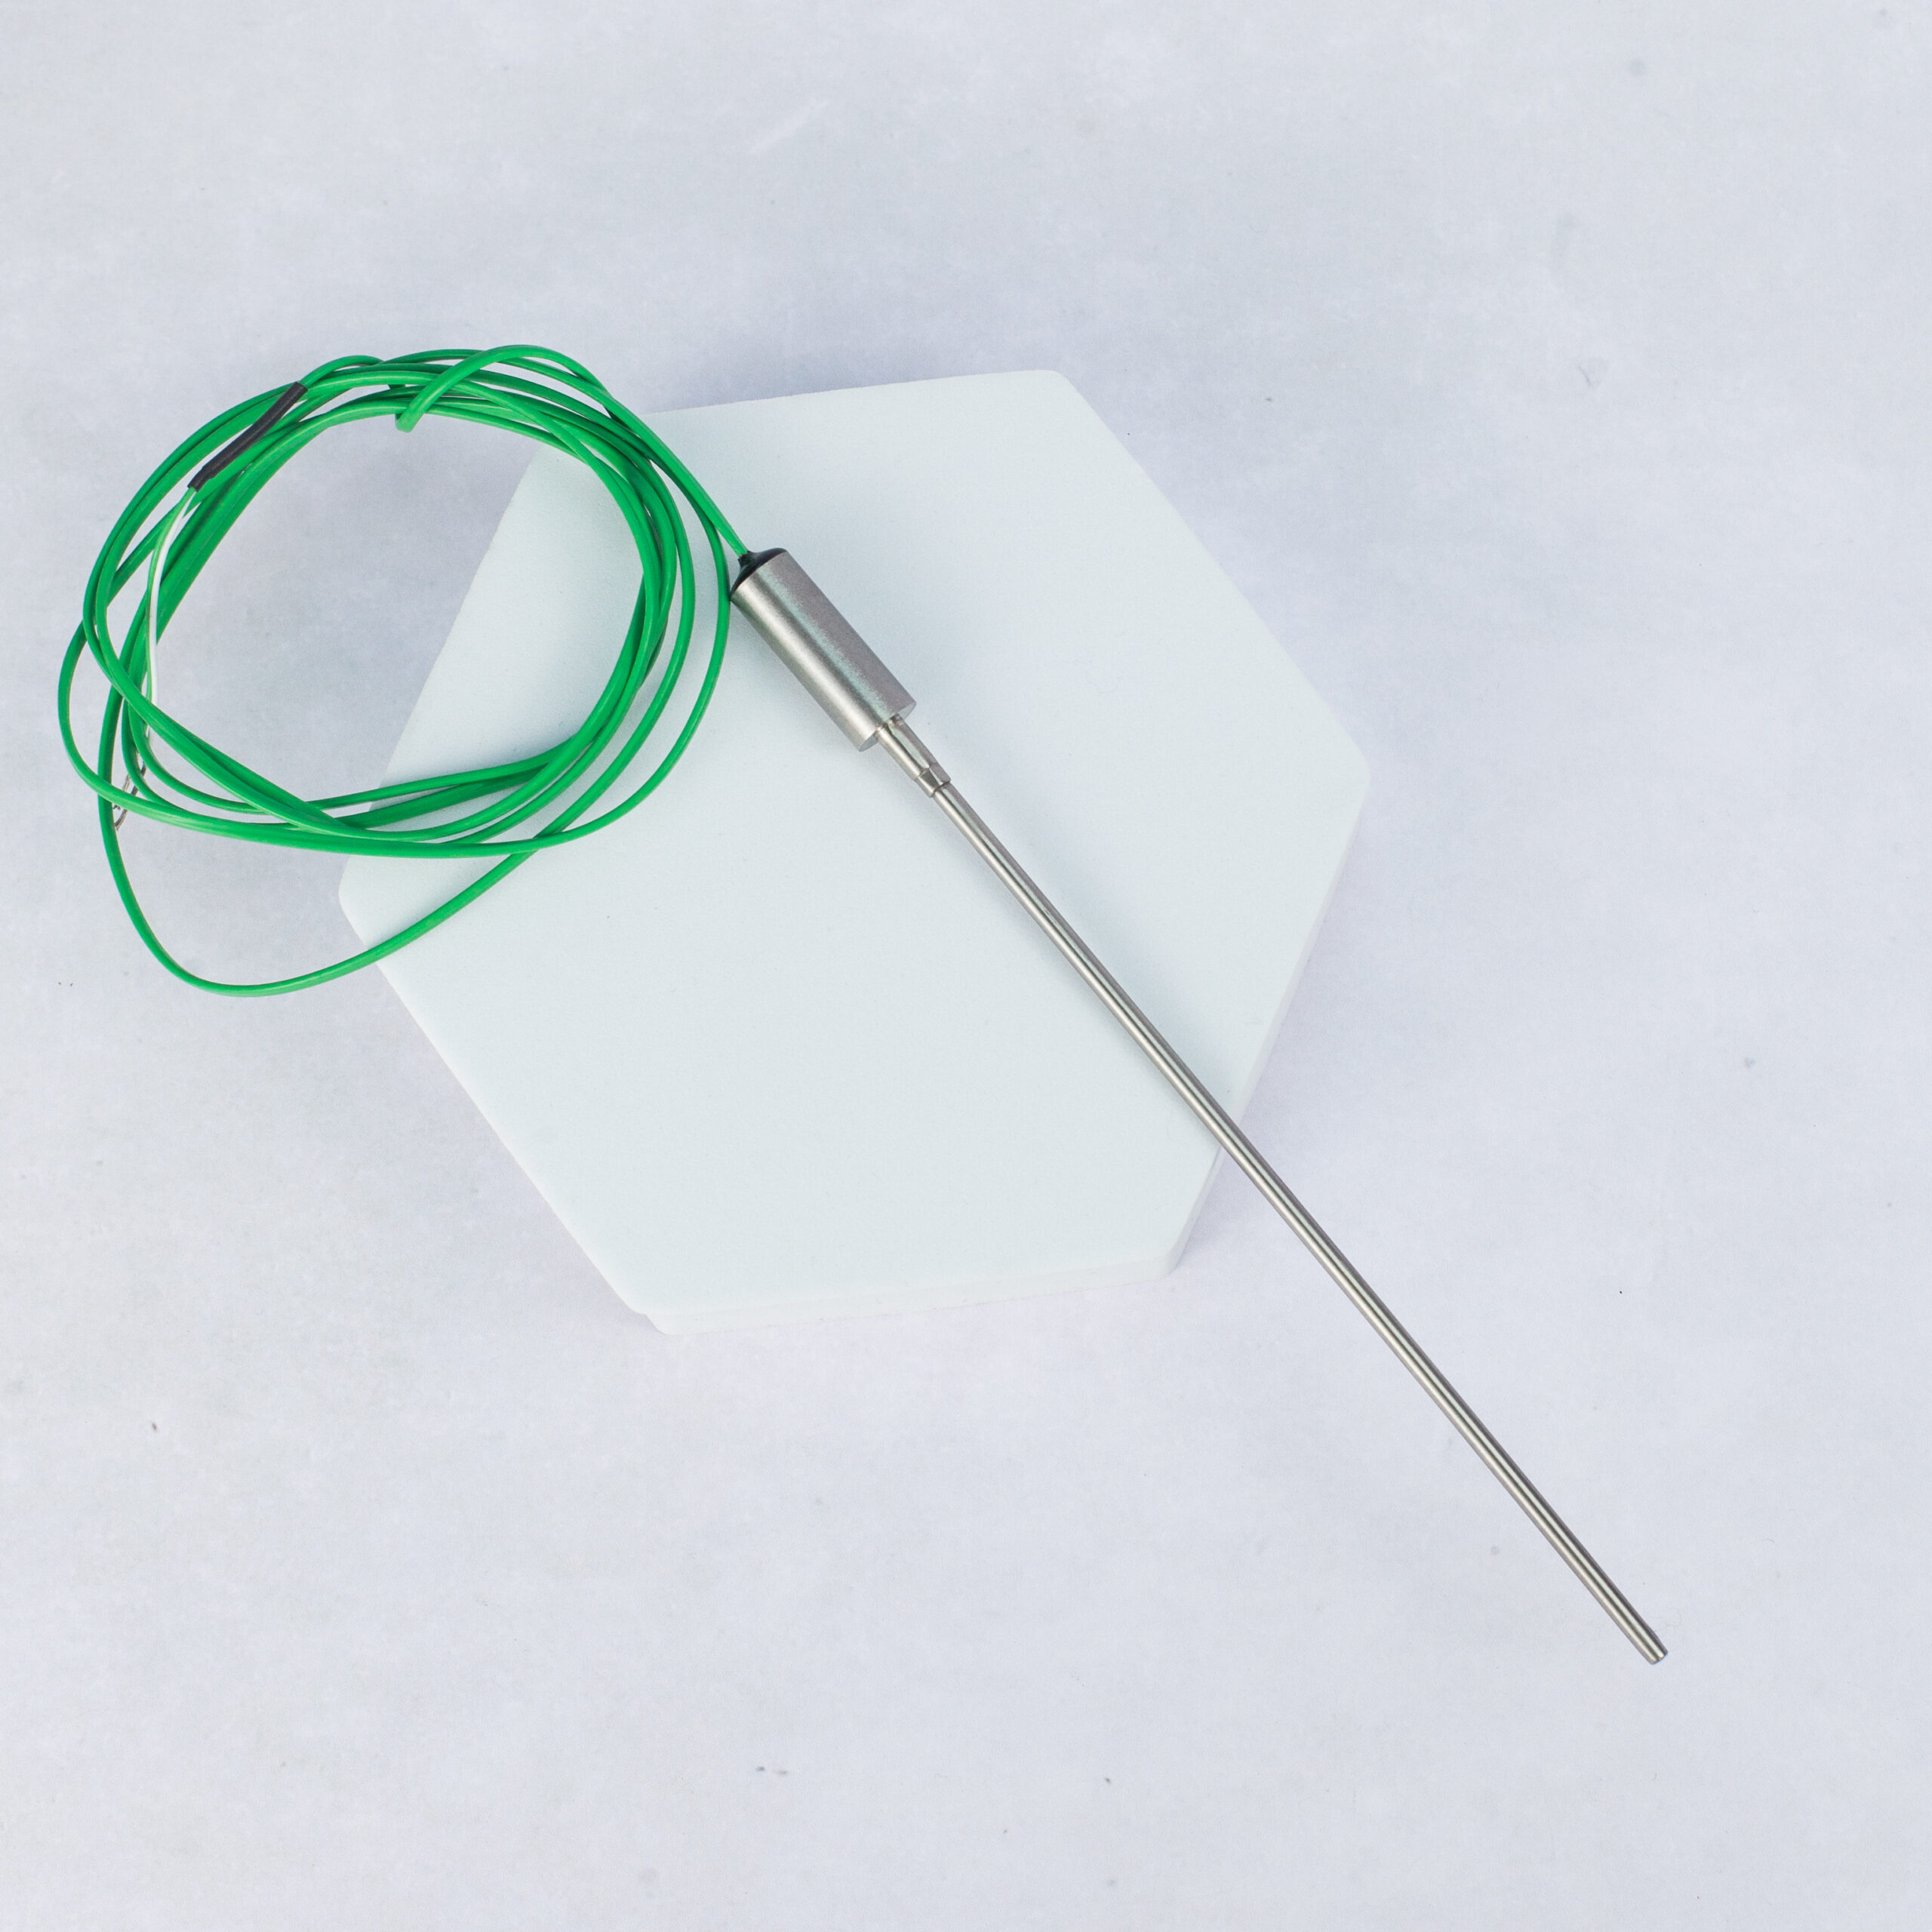 Mineral Insulated Thermocouple Sensor - PPL13-T